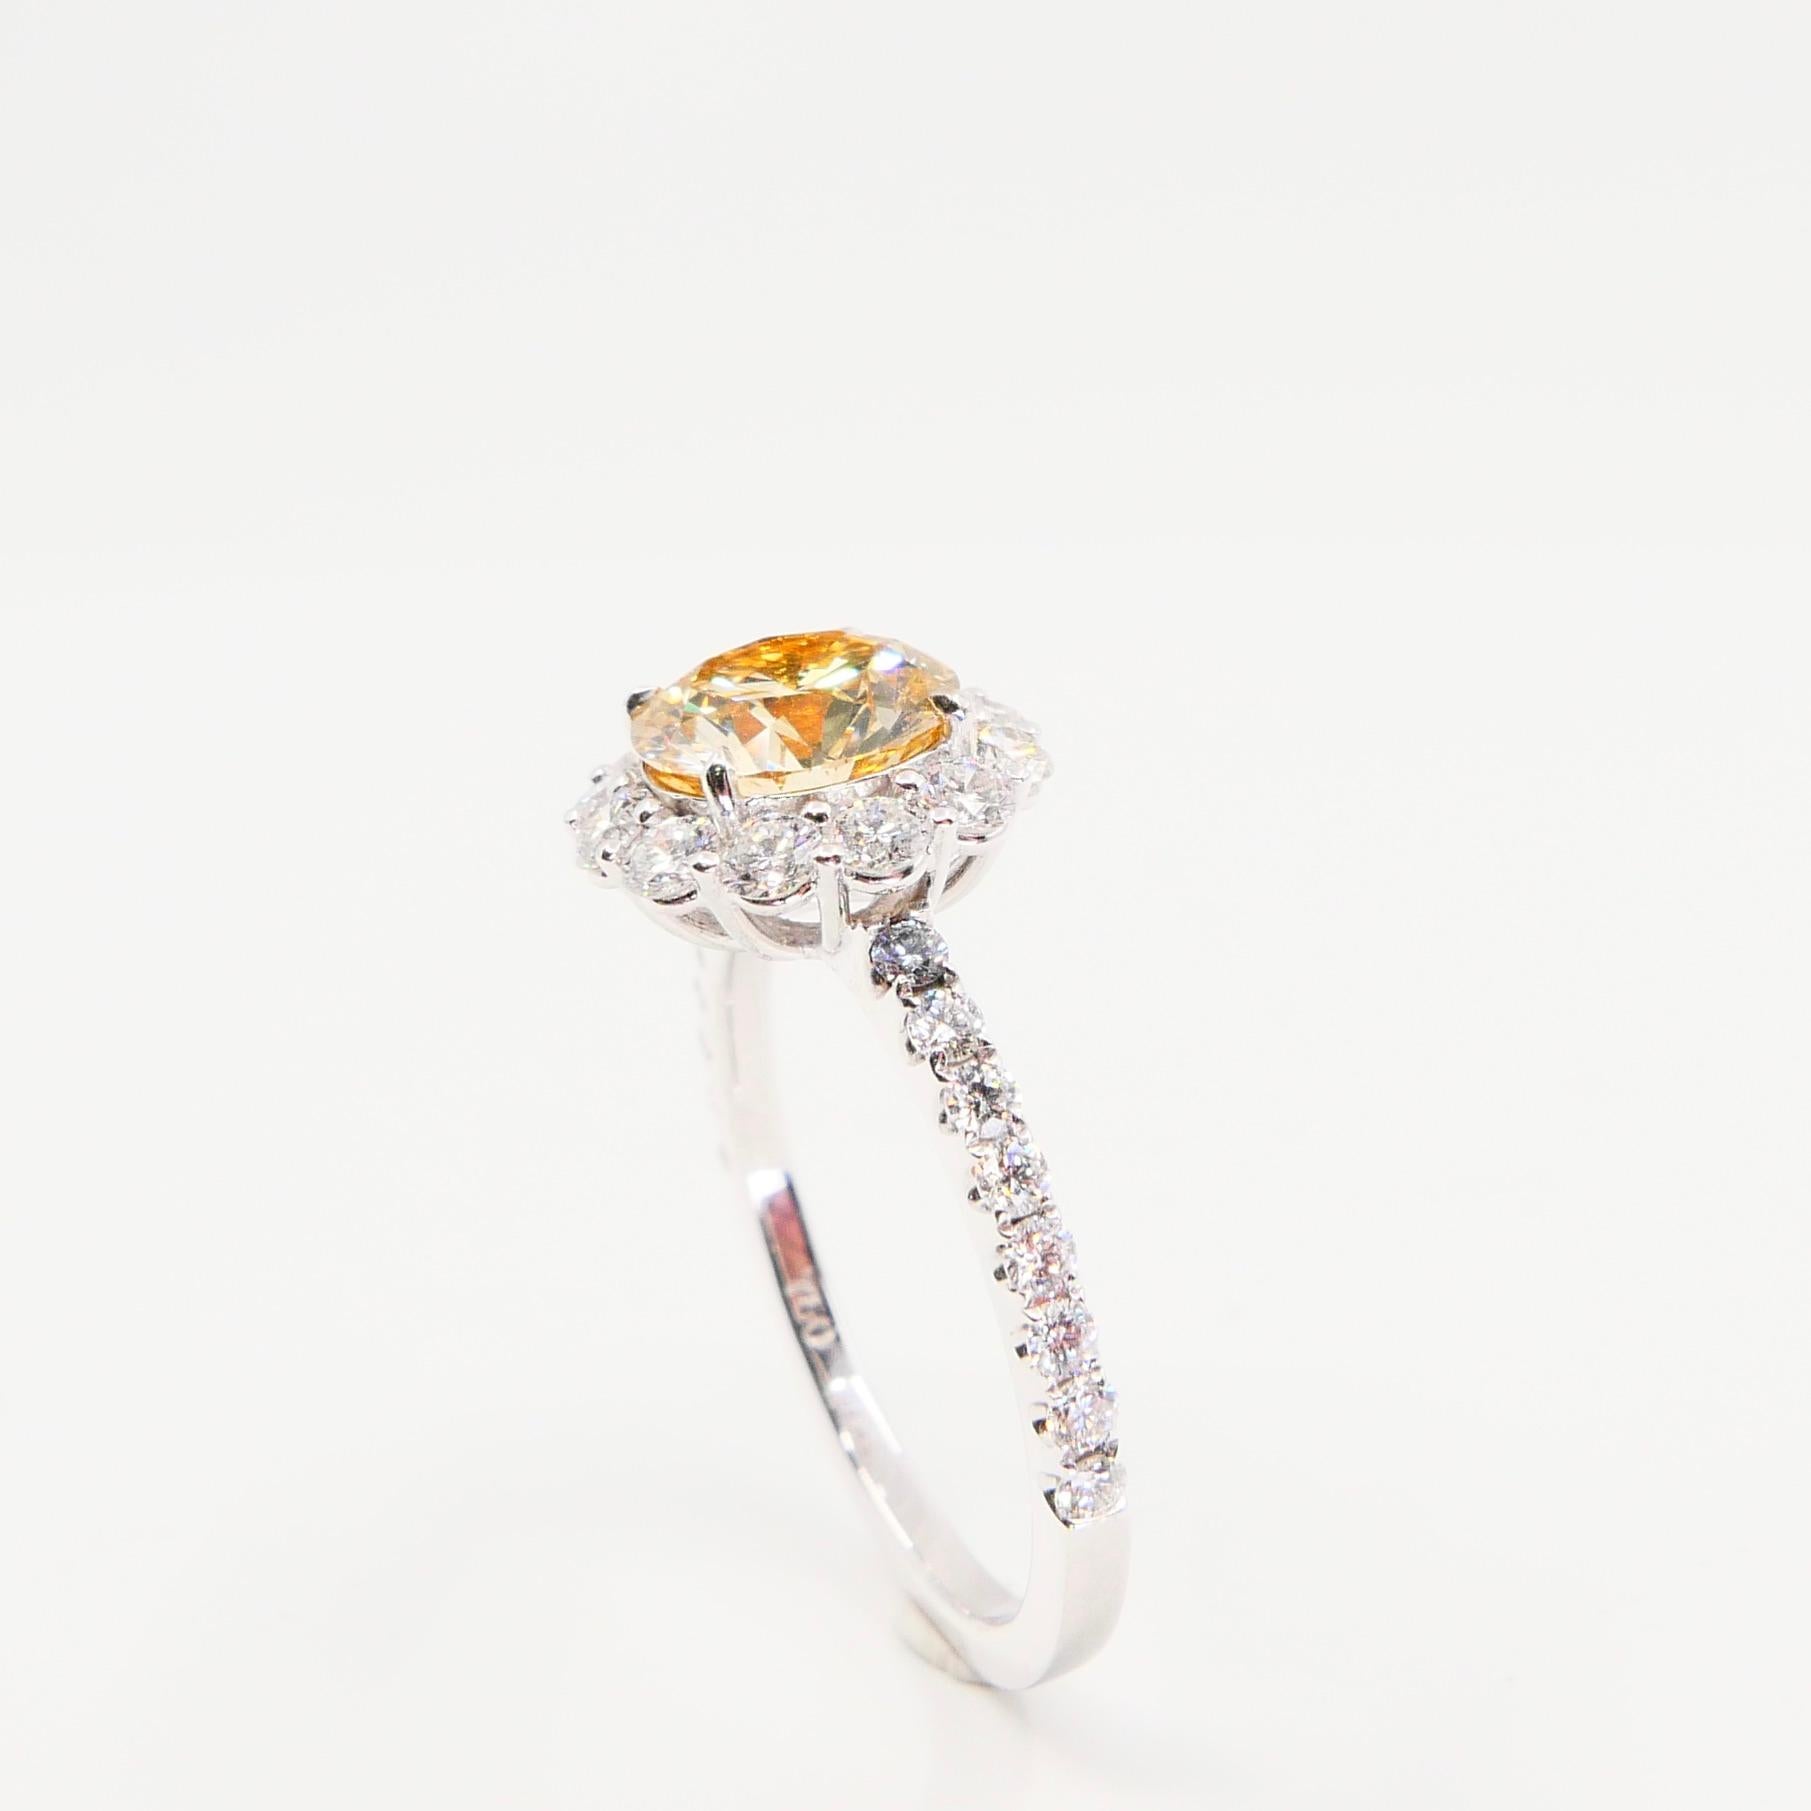 GIA Certified 1.23 Fancy Light Brownish Yellow Diamond Cocktail Ring VS2 Clarity 1